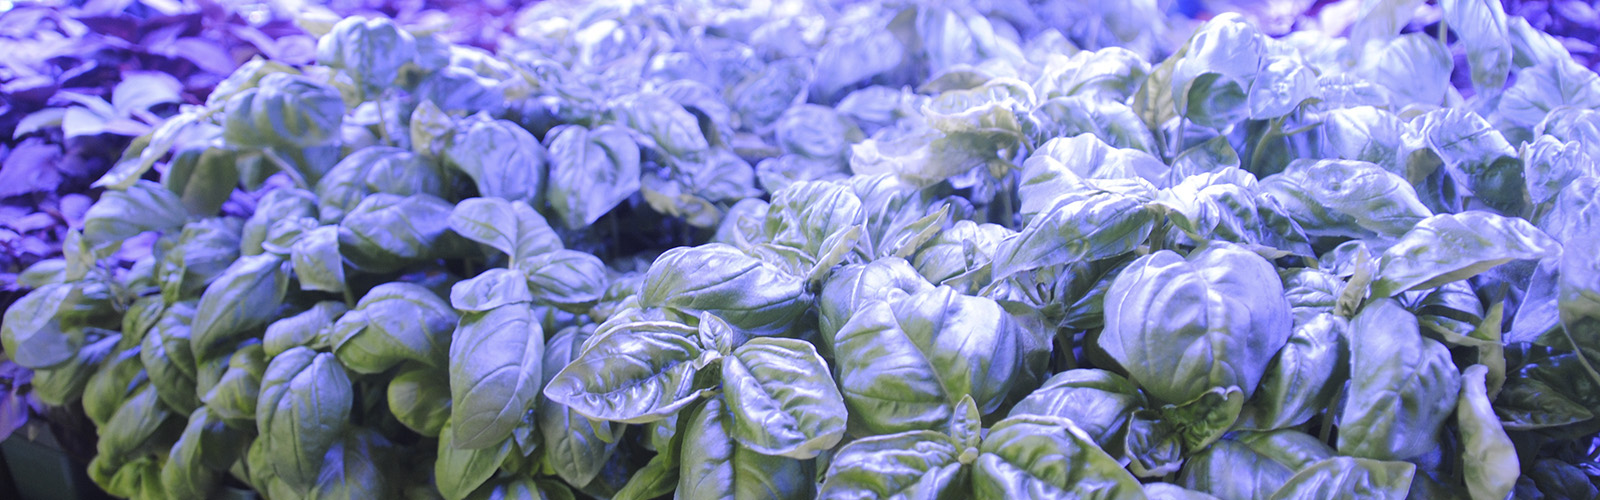 Rooted Locally grows more than 25 varieties of microgreens, including several varieties of basil.